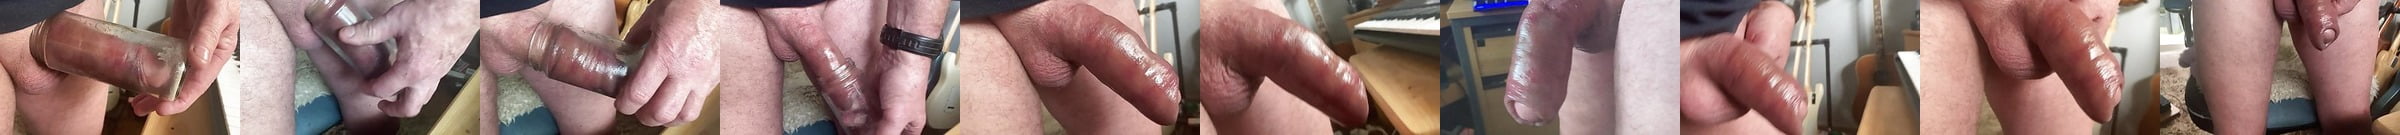 In Bed Stroking And Hard Pulsating Cum Free Gay Hd Porn A9 Xhamster